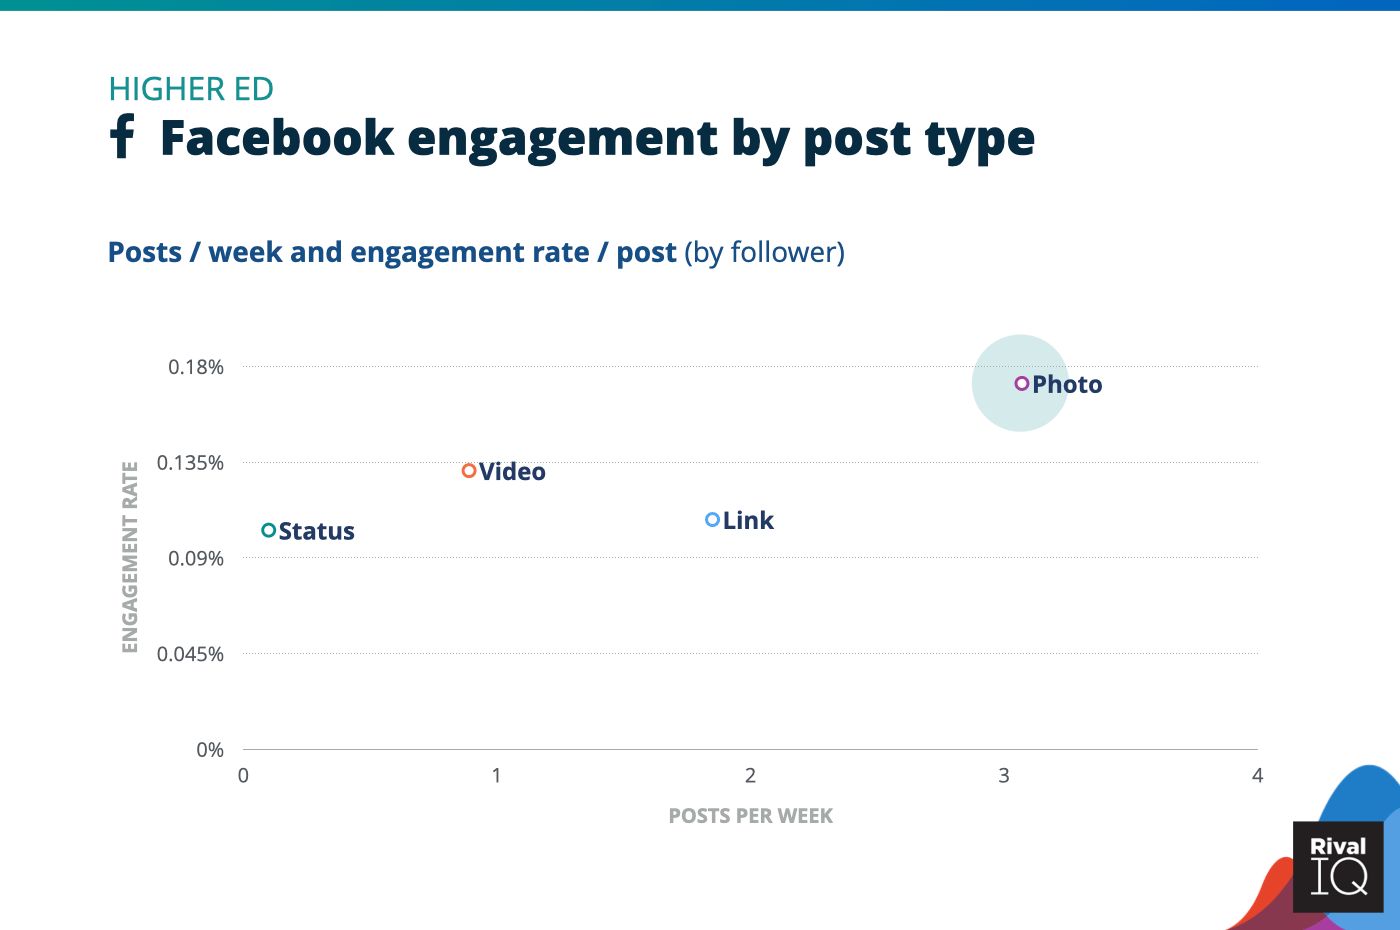 Chart of Facebook posts per week and engagement rate by post type, Higher Ed